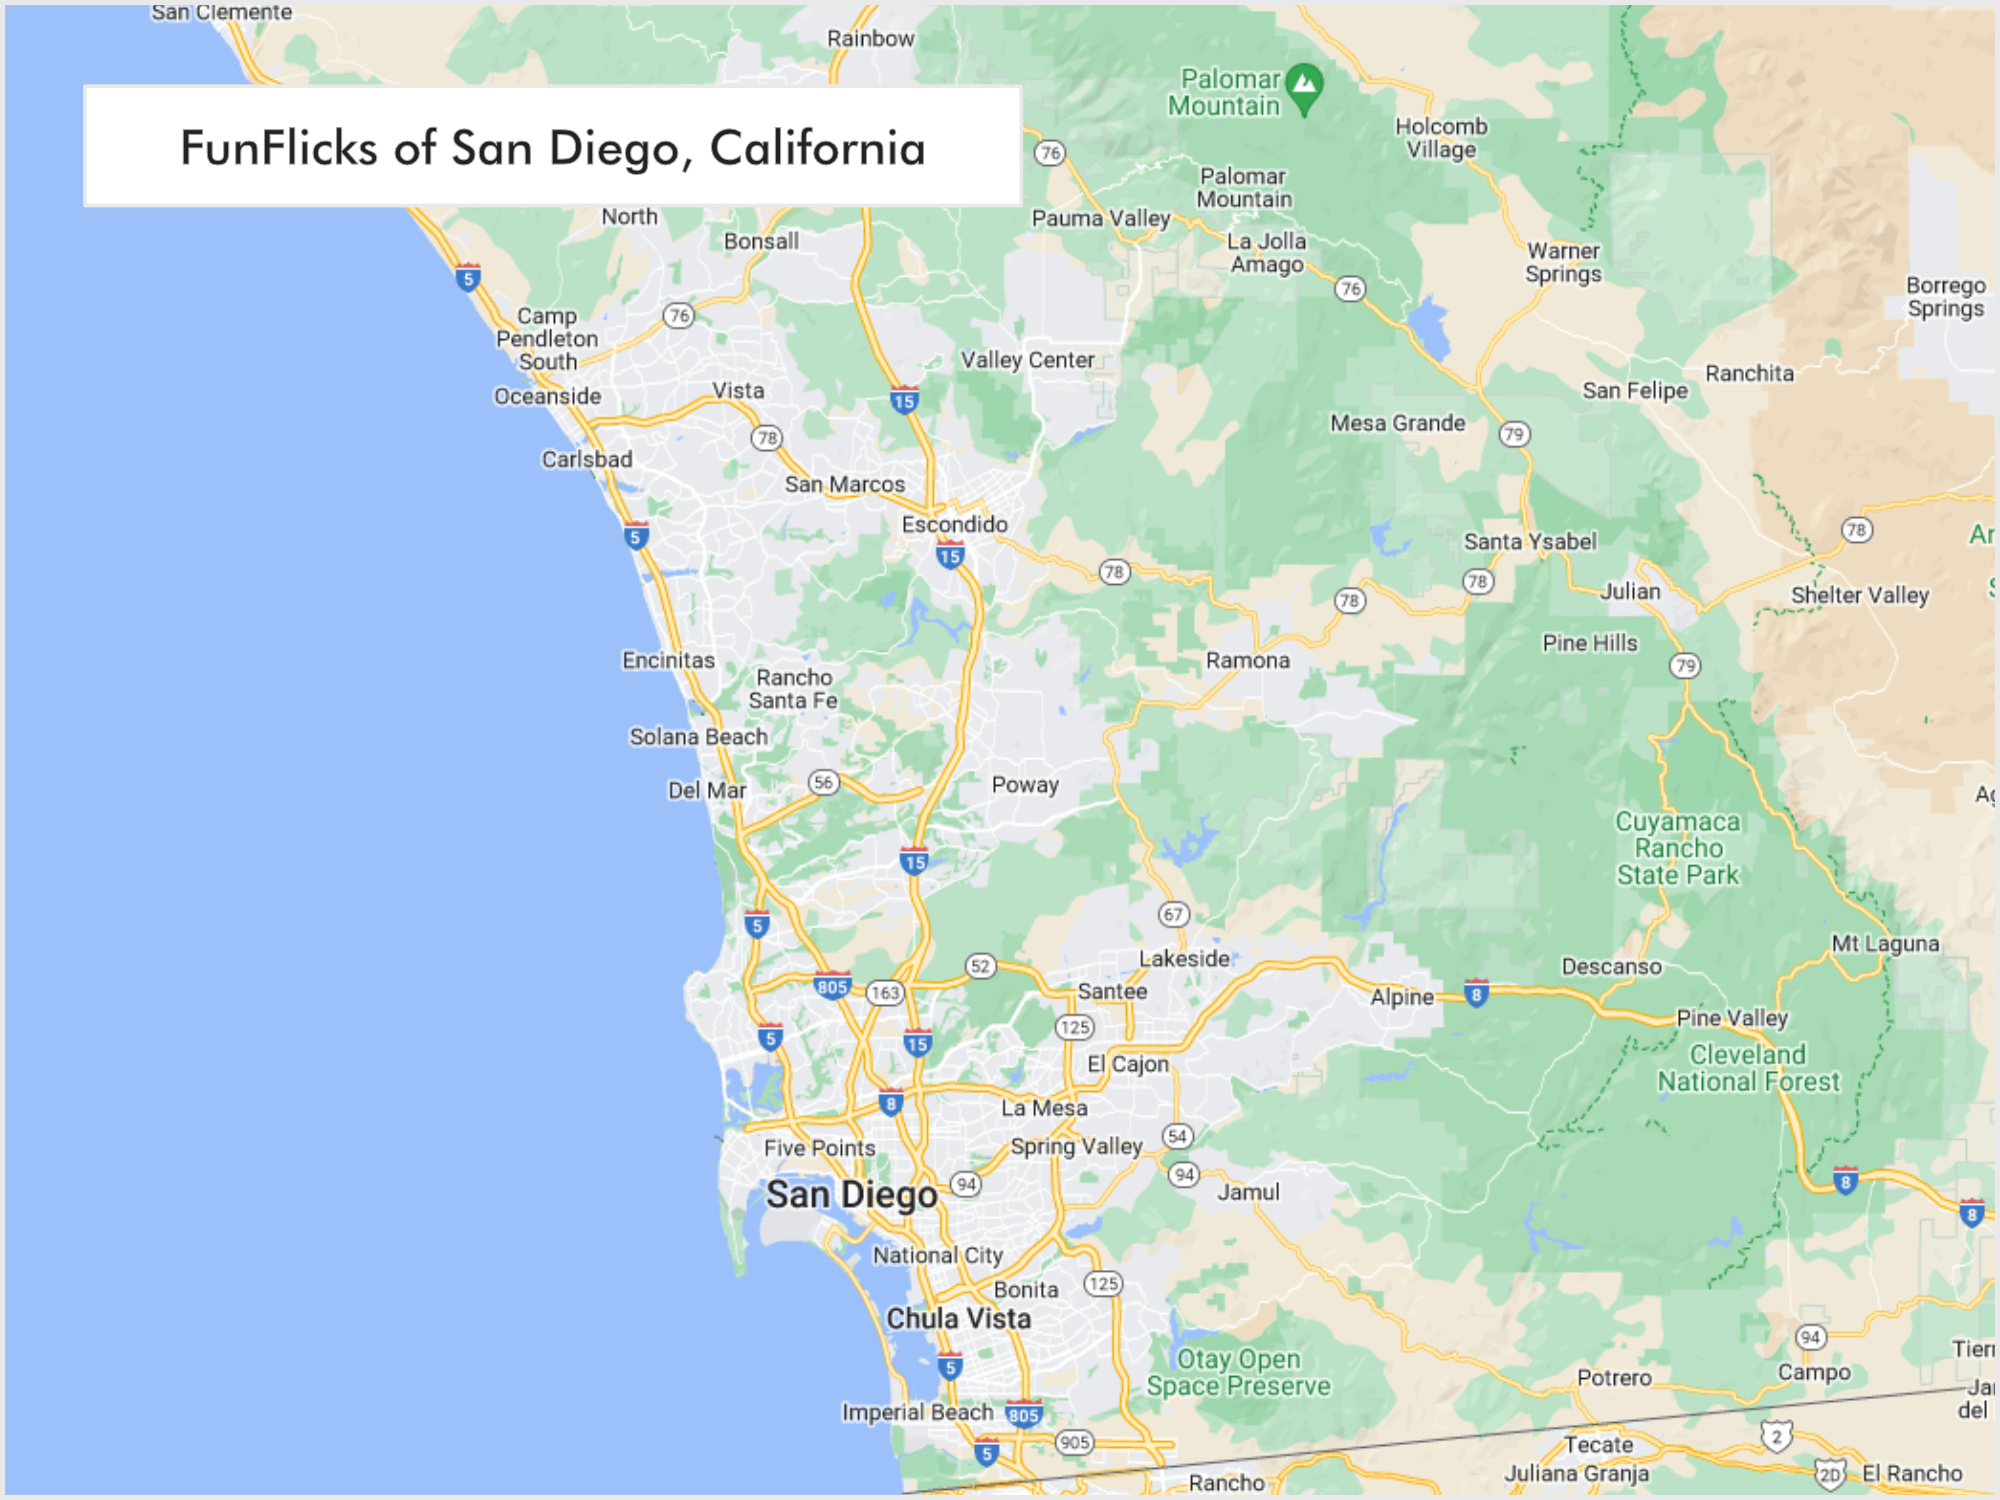 FunFlicks® San Diego territory map